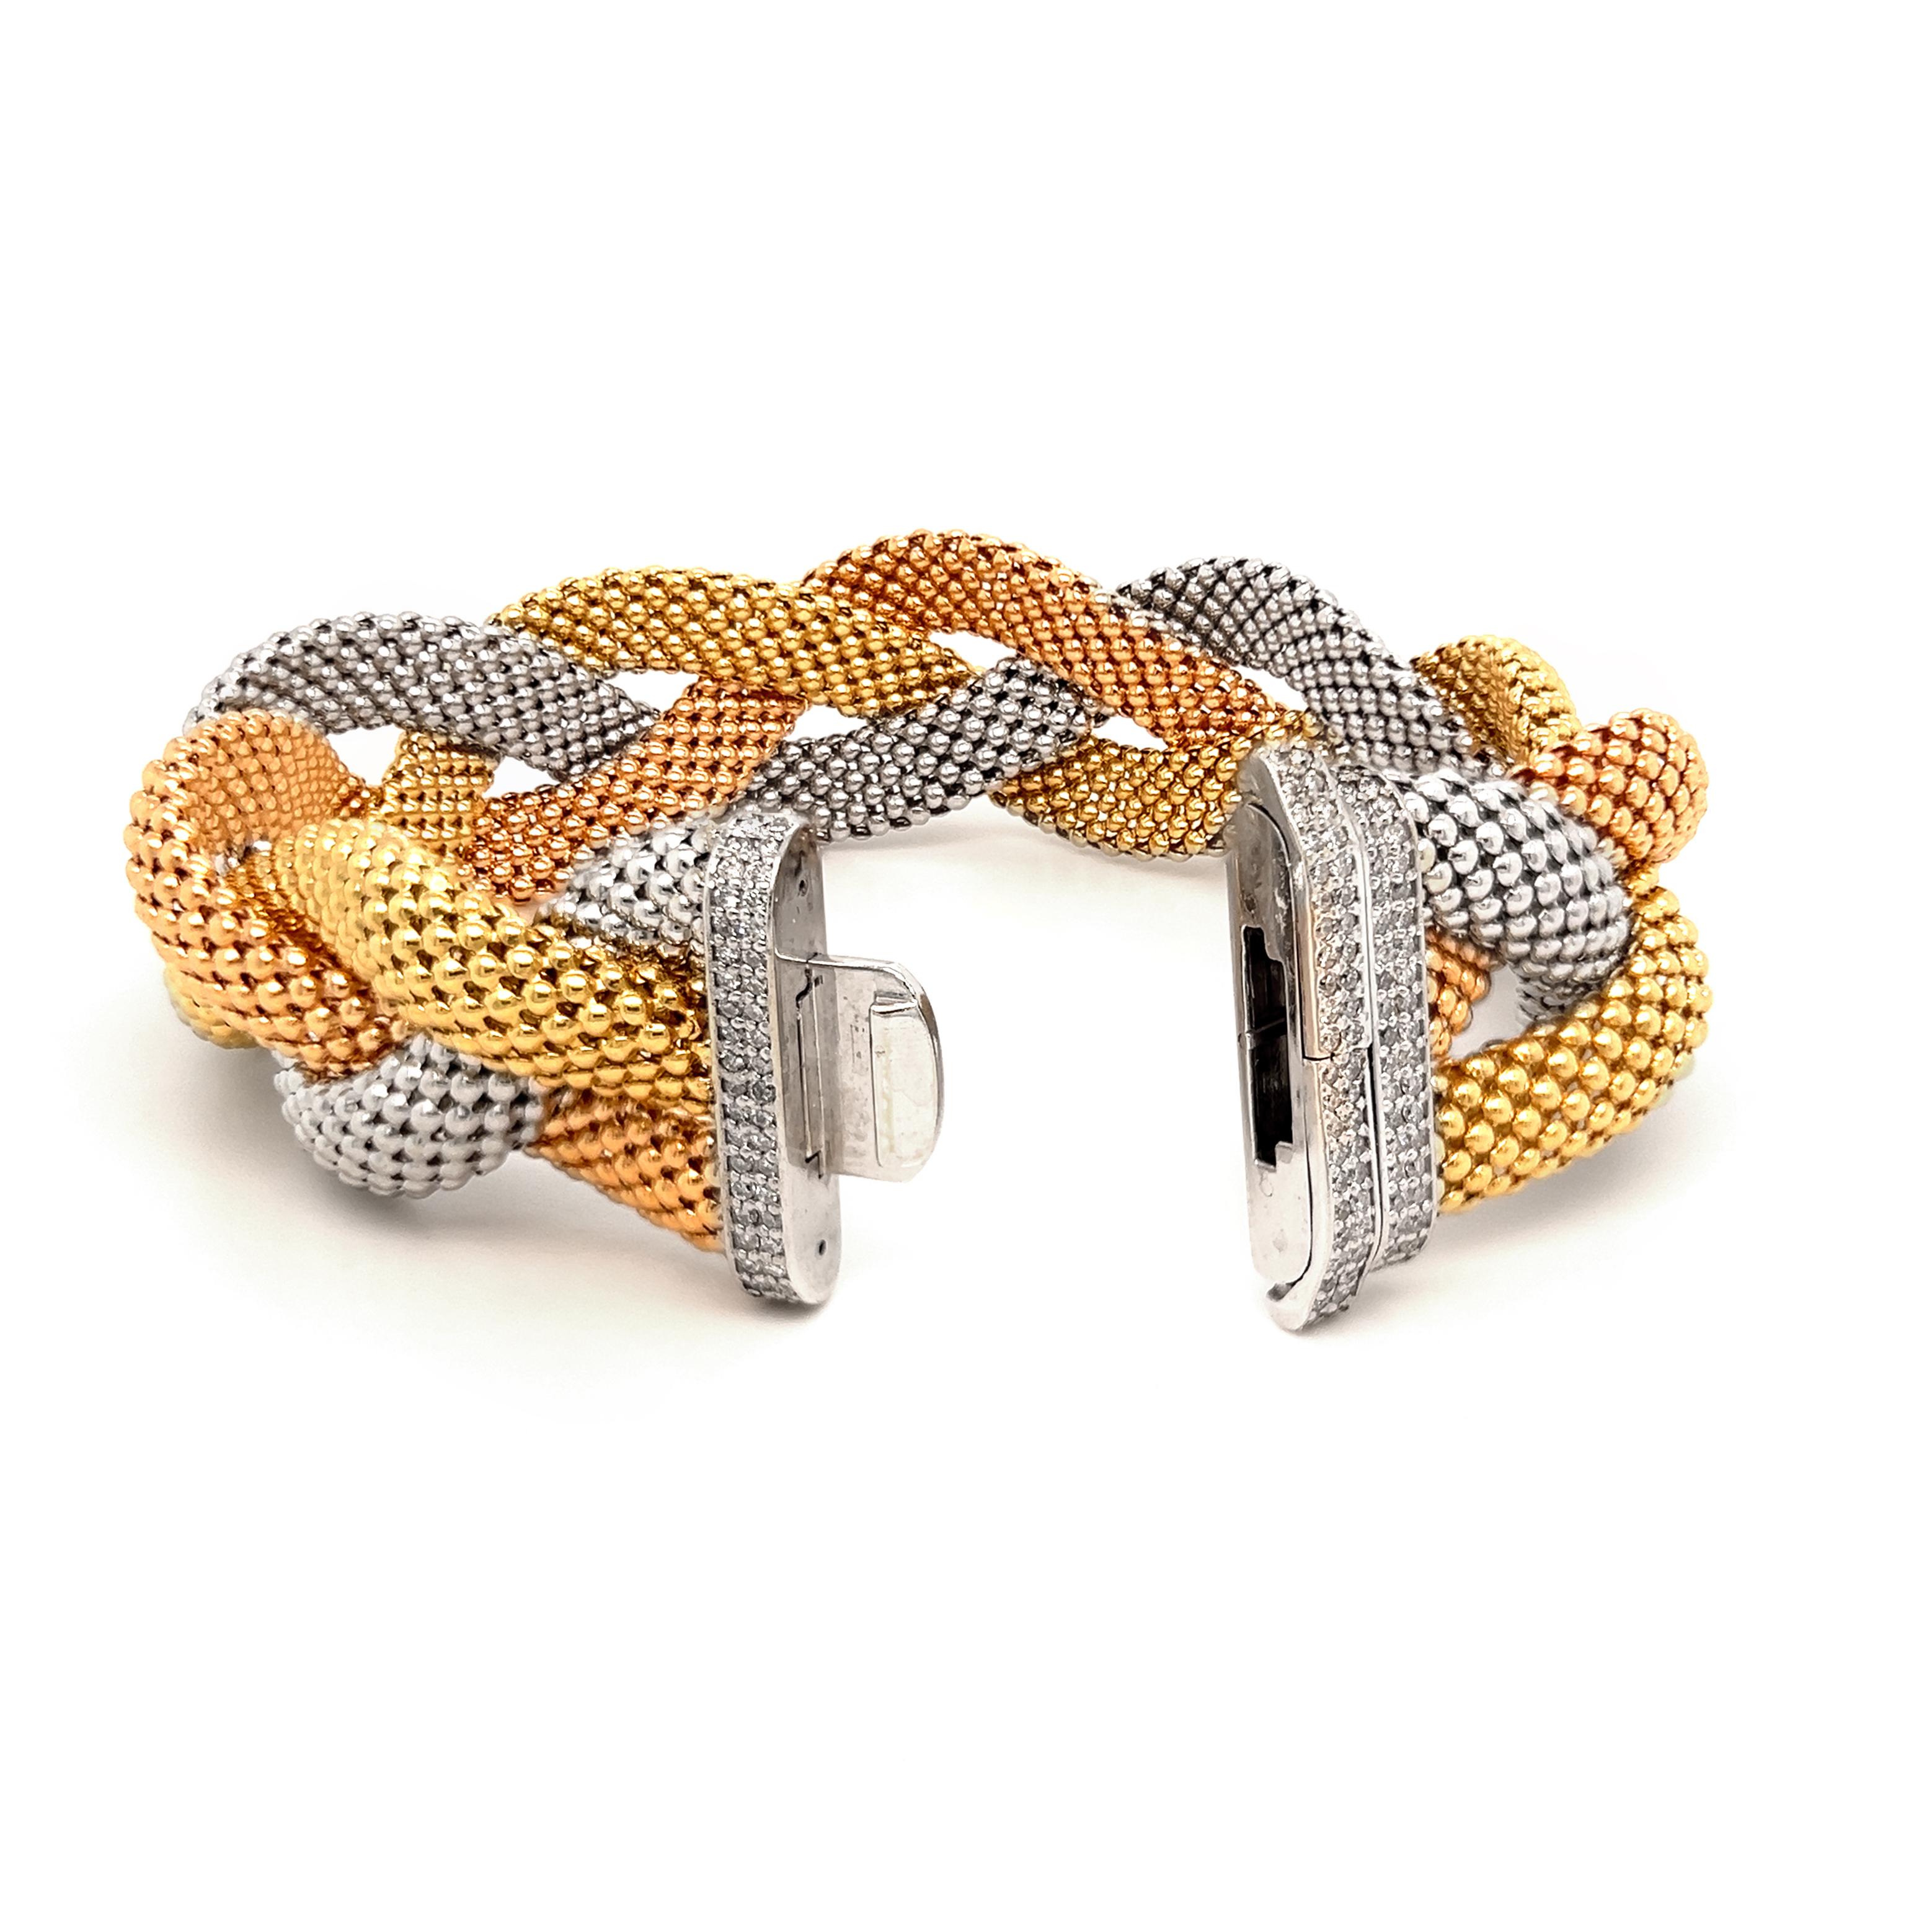 18K Tri-Color Yellow White Rose Gold and Diamond Twisted Bracelet

This Italian made bracelet features tri-color gold with a diamond buckle to clasp in the center. Yellow white and rose gold chains are twisted together to form this stunning, unique